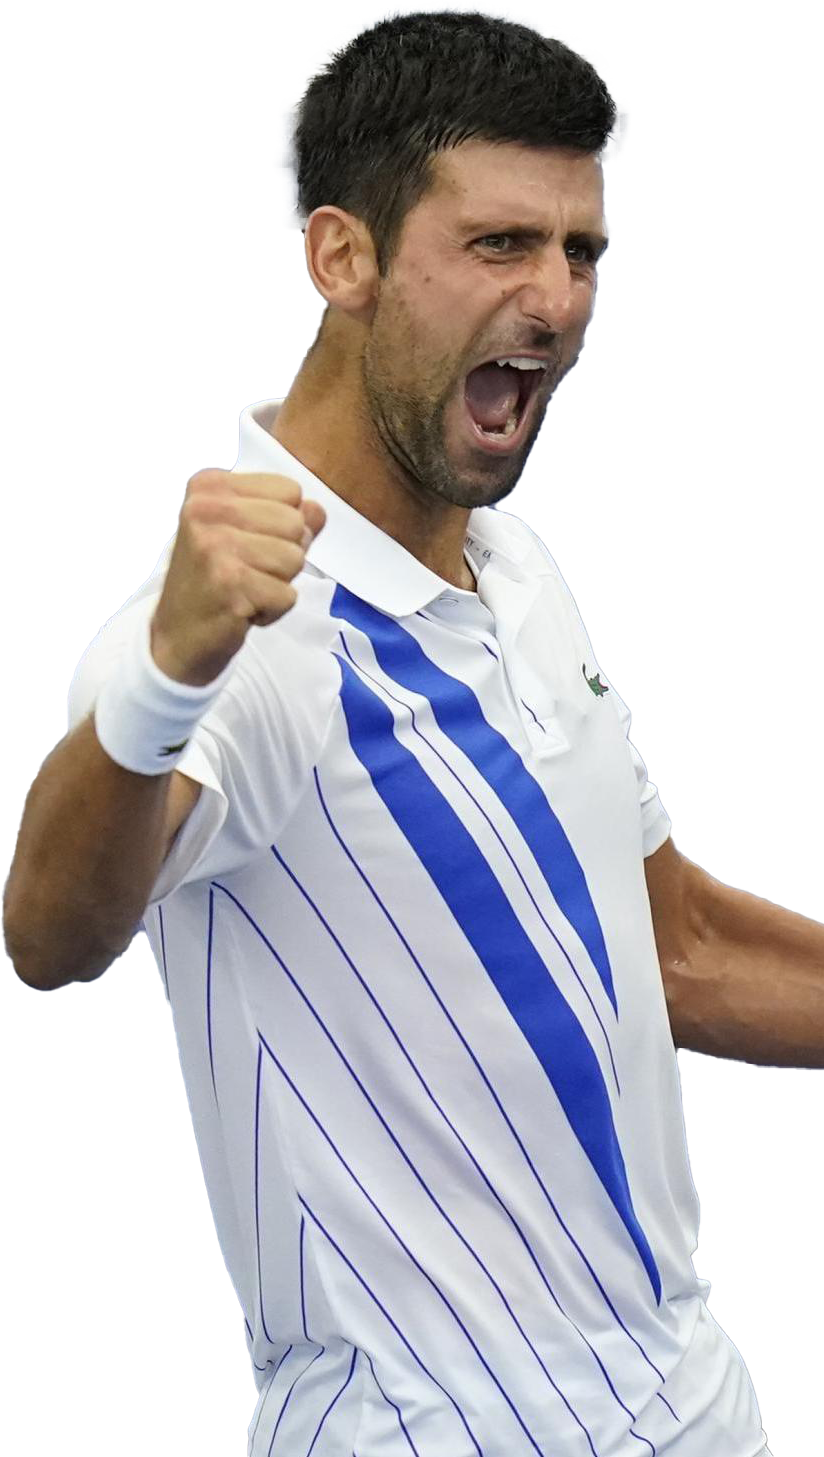 Tennis Player Celebrating Victory PNG image